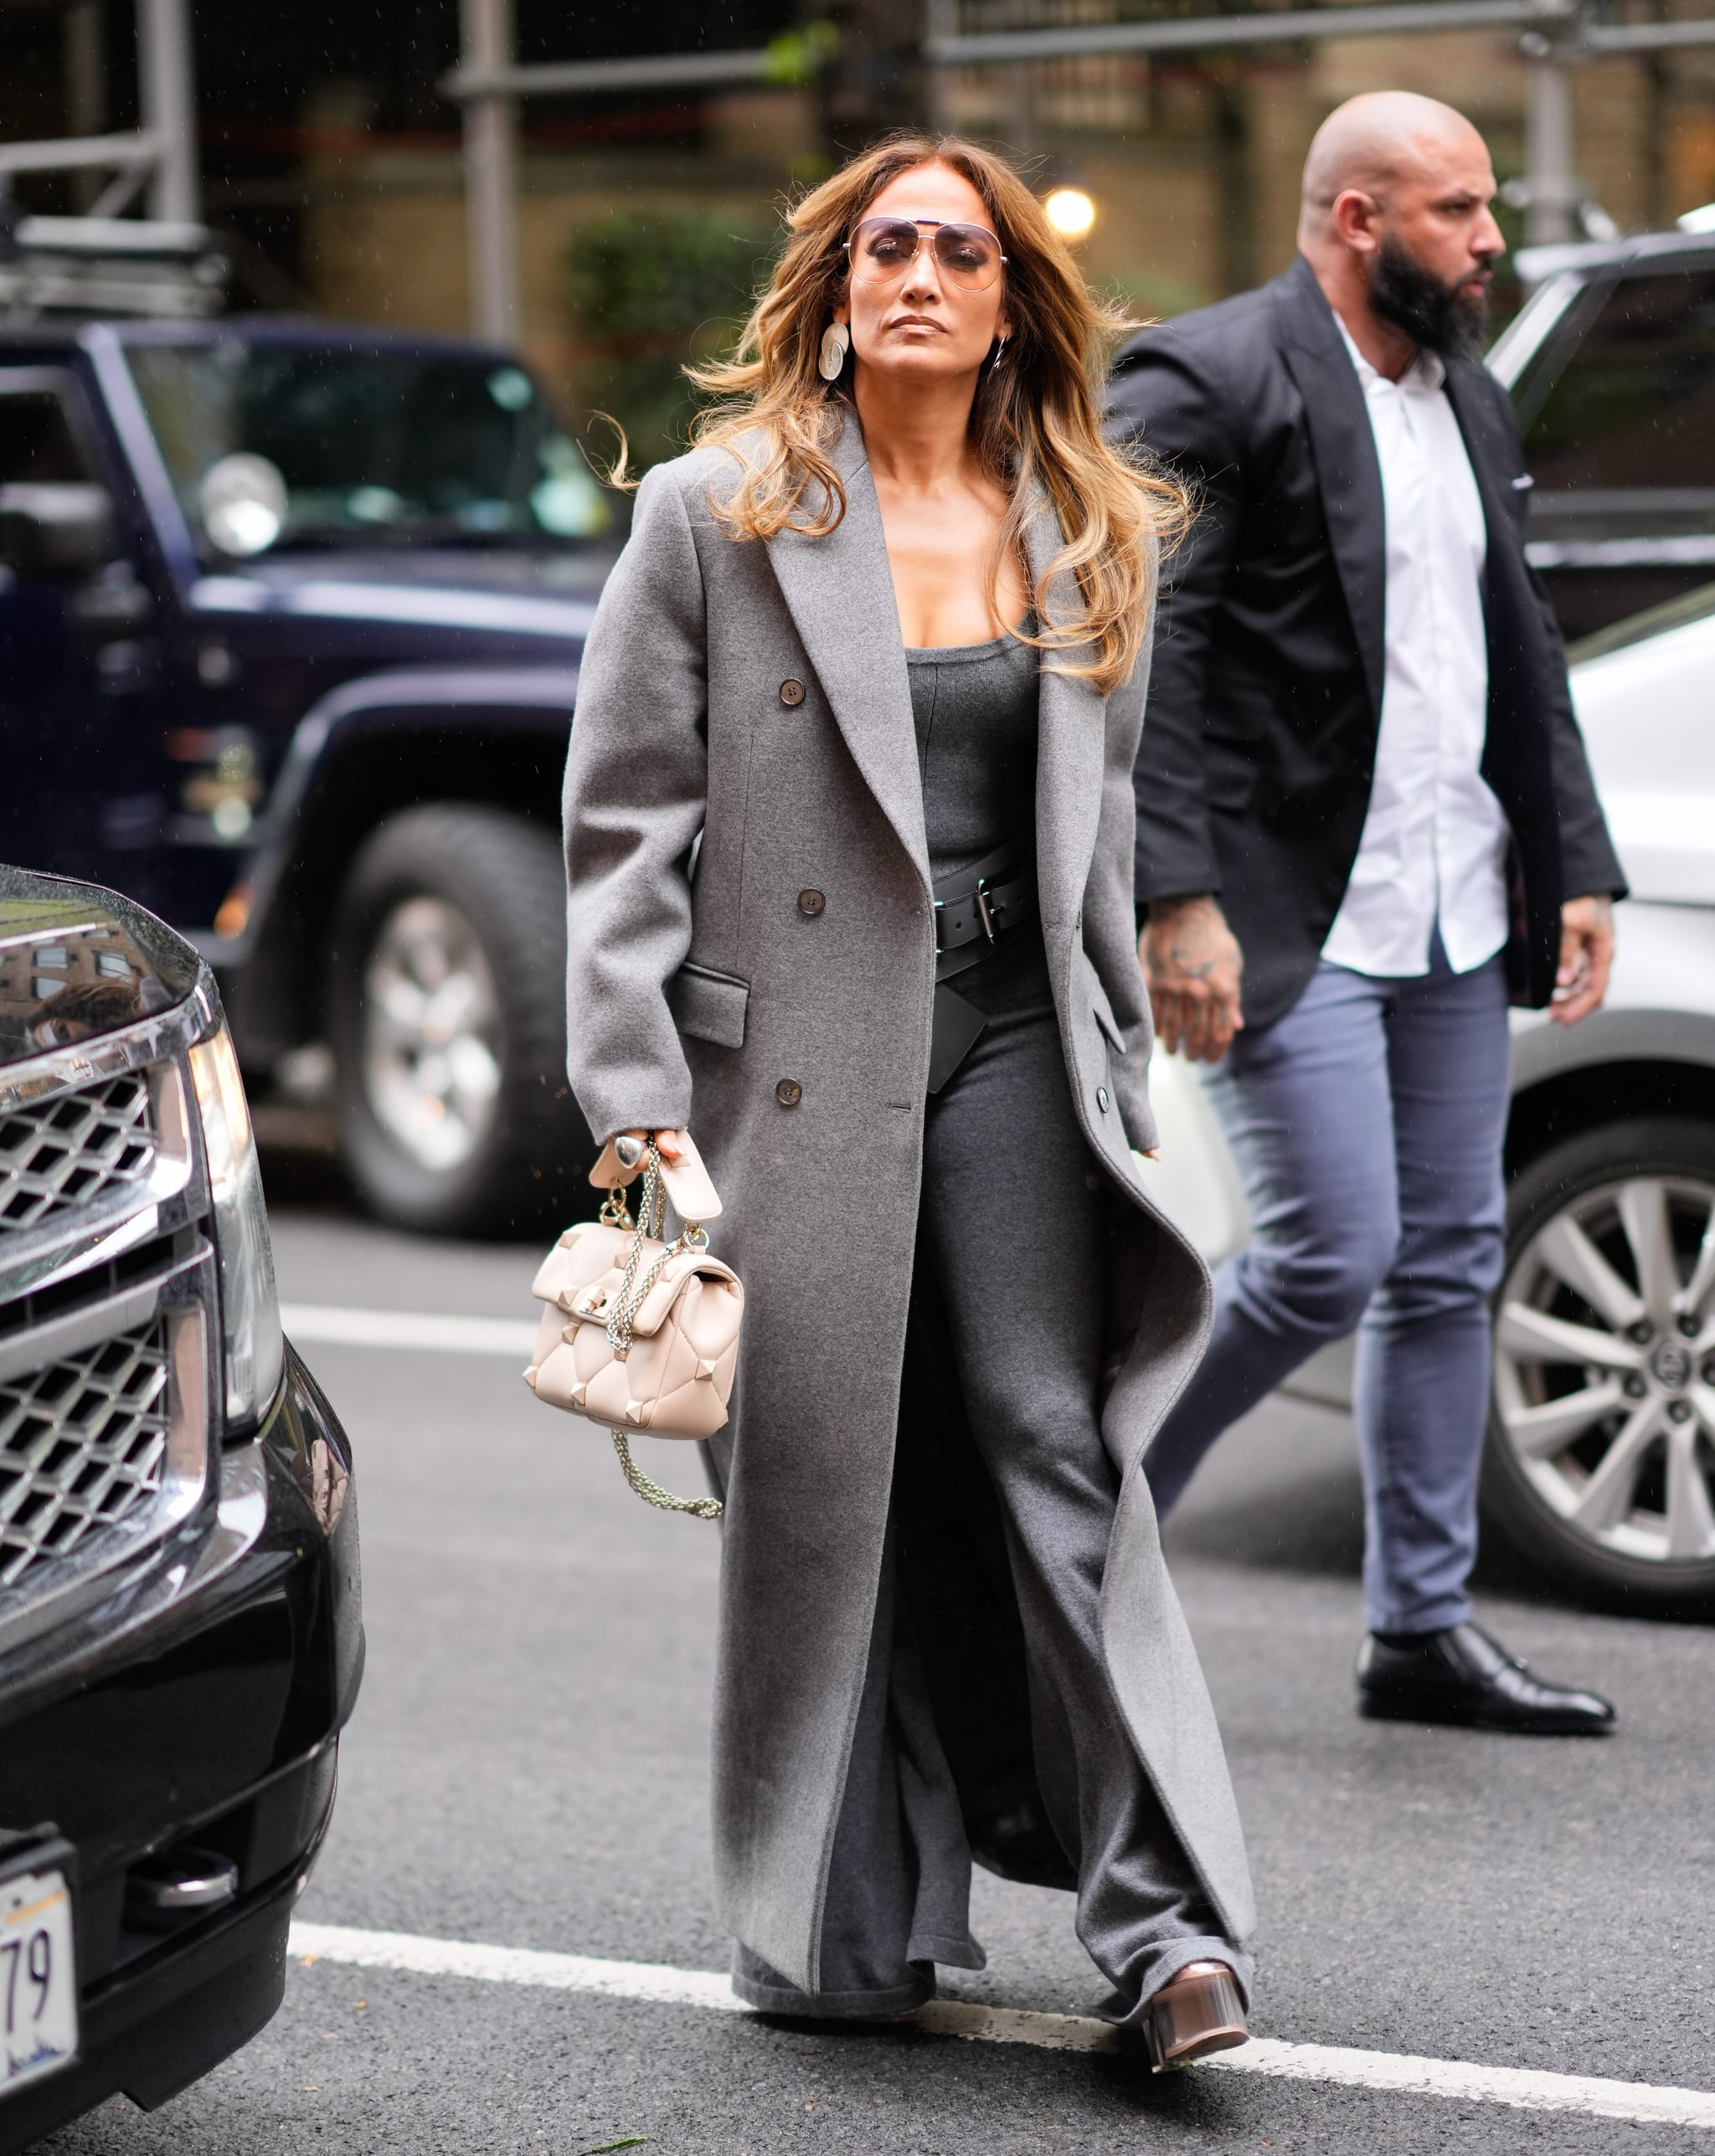 Jennifer Lopez's Monochrome Michael Kors Outfit in NYC | Jennifer Lopez Looks Like She's Walking on Air in 6-Inch Invisible Platforms | Fashion UK Photo 7